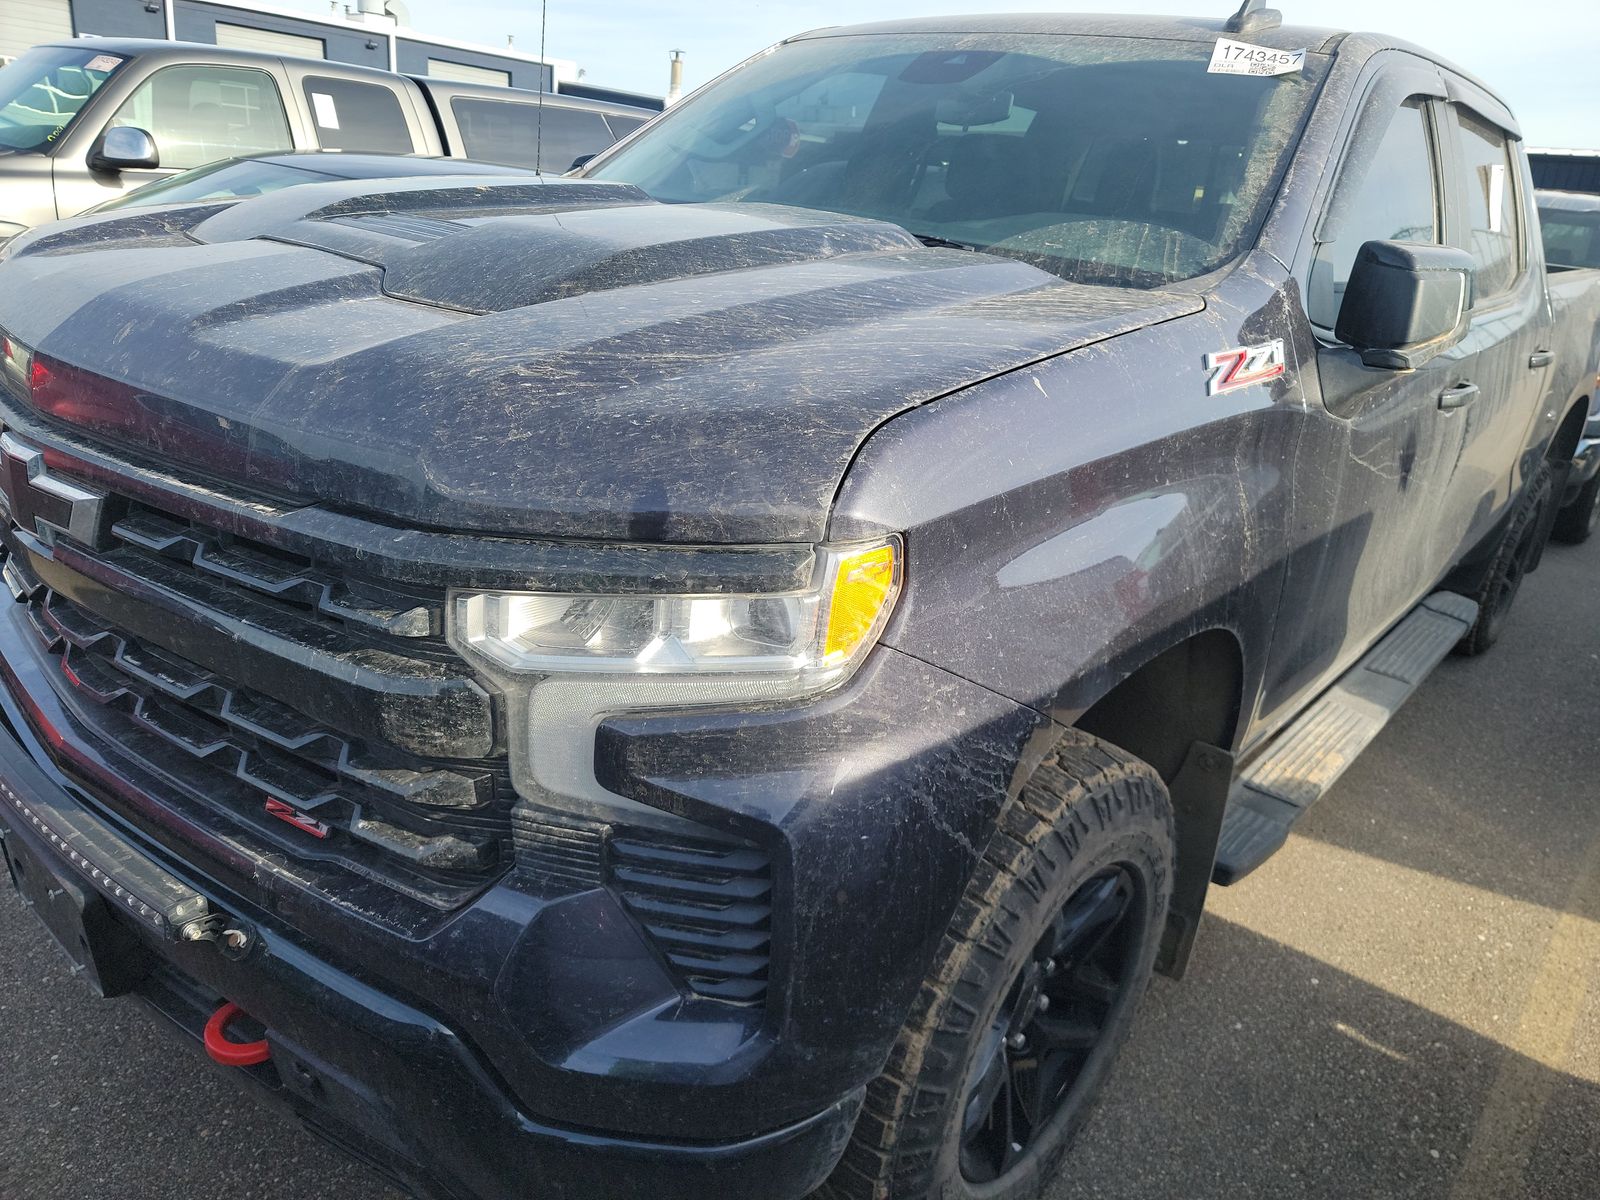 Used 2022 Chevrolet Silverado 1500 LT Trail Boss with VIN 3GCUDFED7NG587112 for sale in Minneapolis, Minnesota